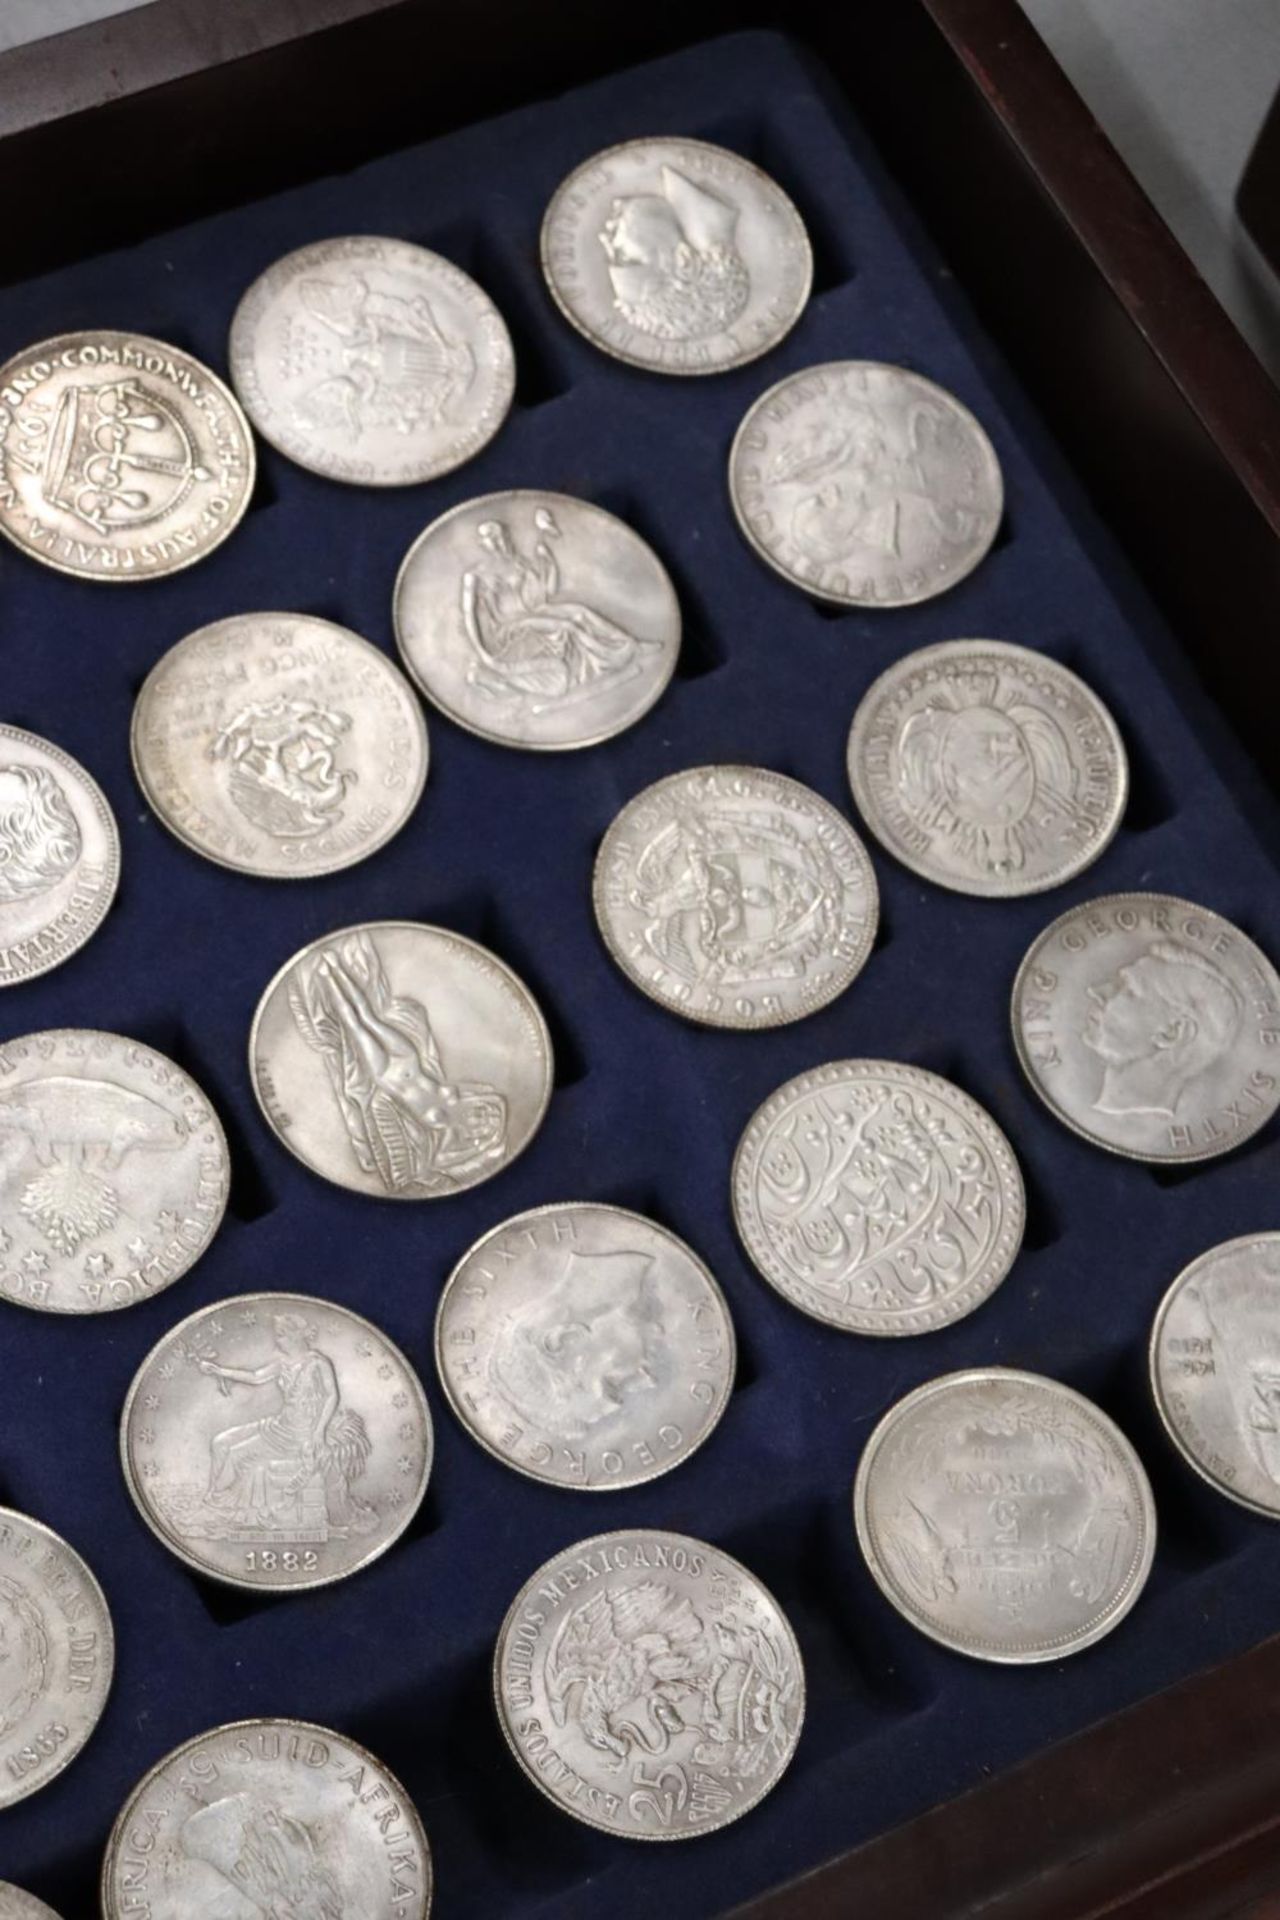 FORTY FOUR VARIOUS VINTAGE TOKENS/COINS IN A WOODEN BOX - Image 5 of 6